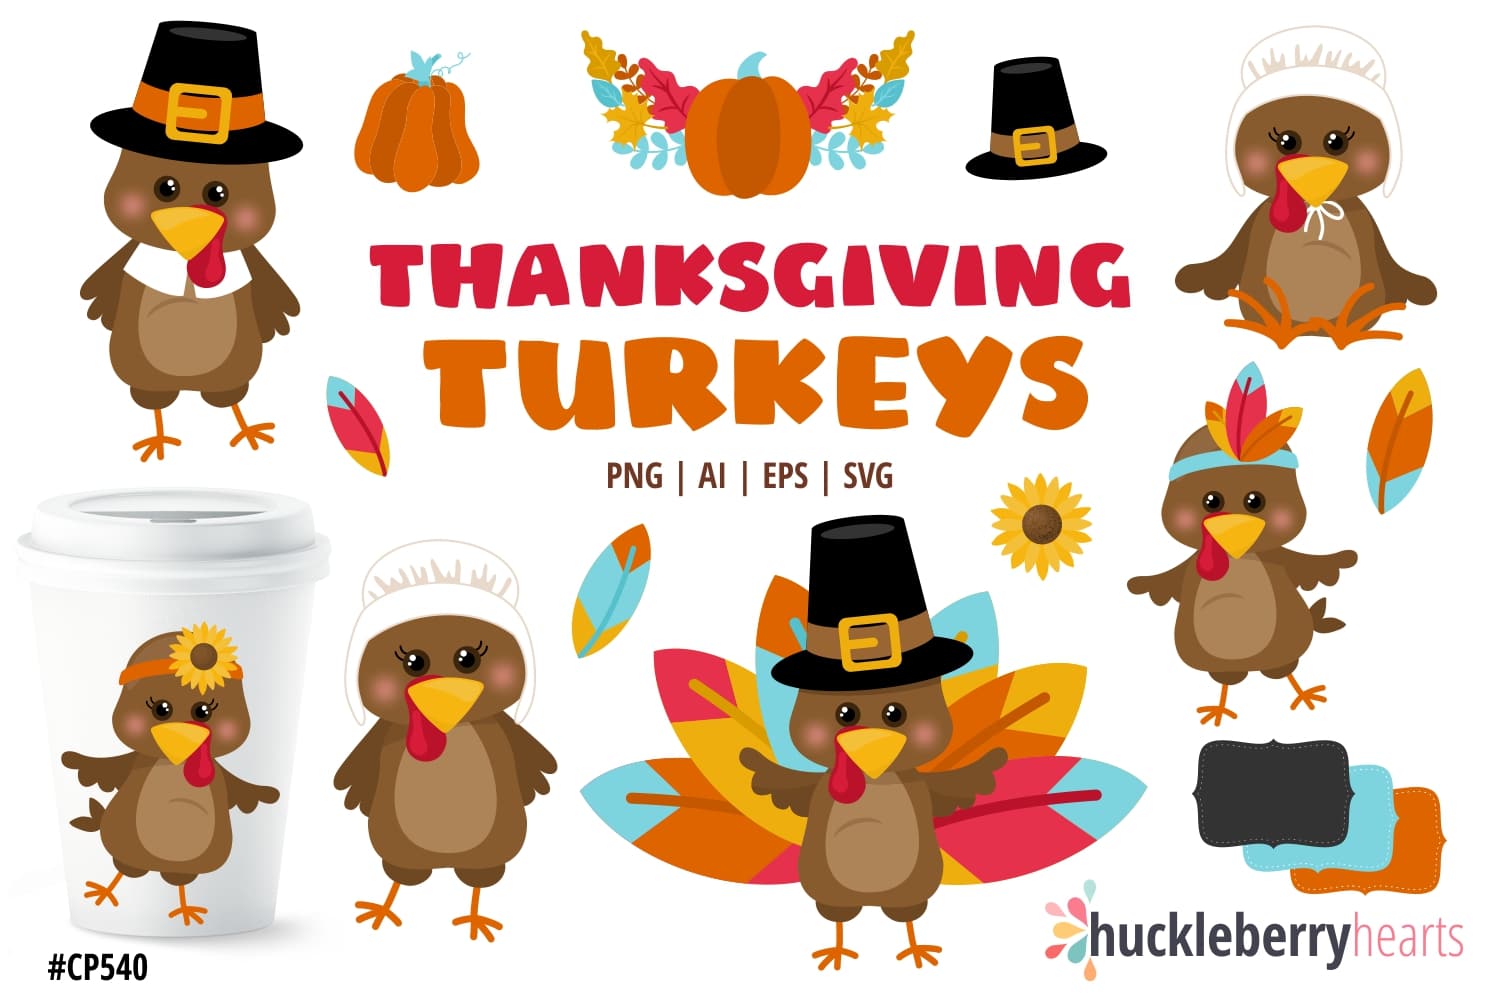 Assorted Thanksgiving Turkey Character clipart set